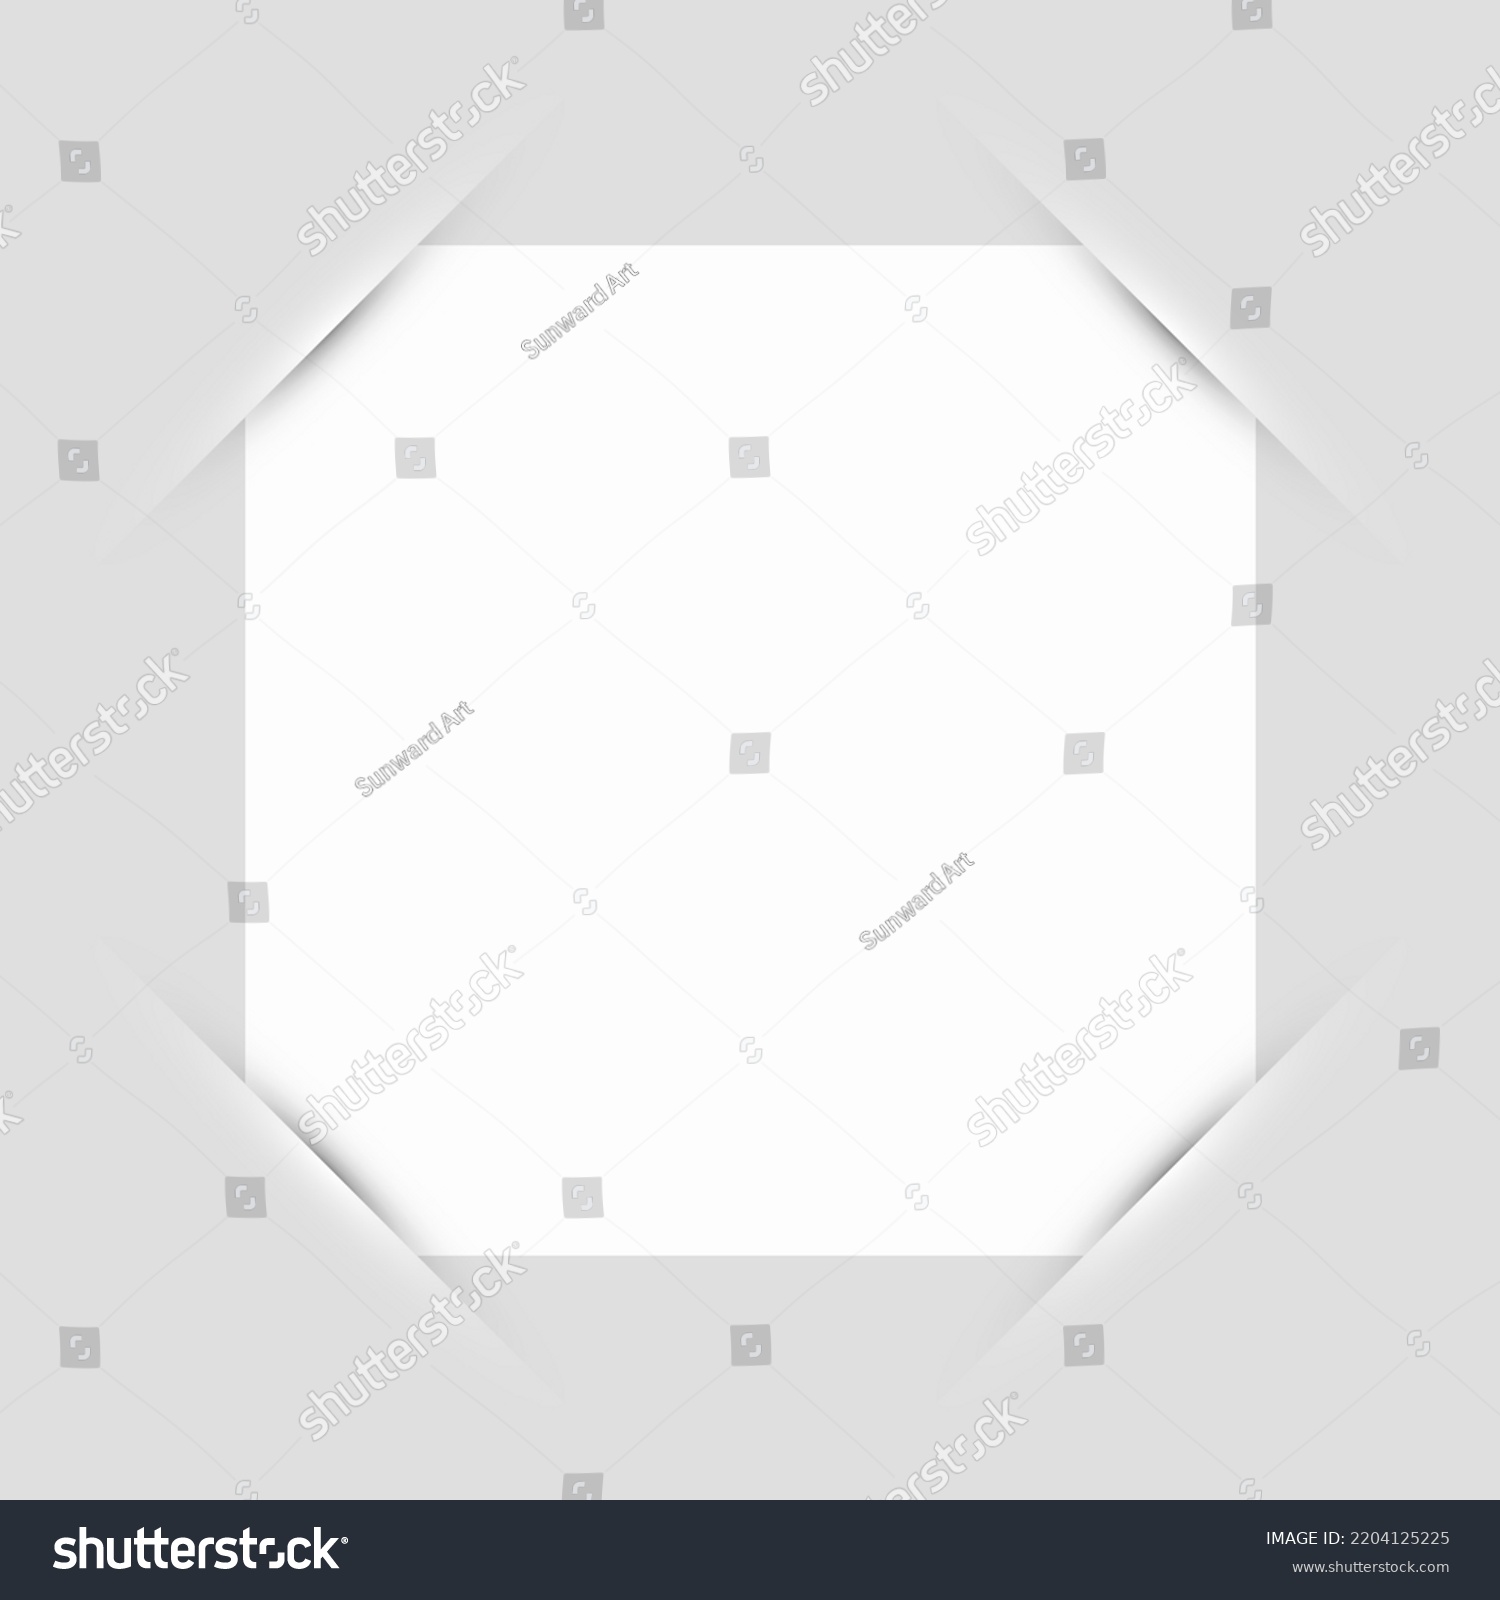 SVG of Pocket corners paper photo frame vector template. Square frame with cun in paper porket corners. Photo space. Retro border frame. svg